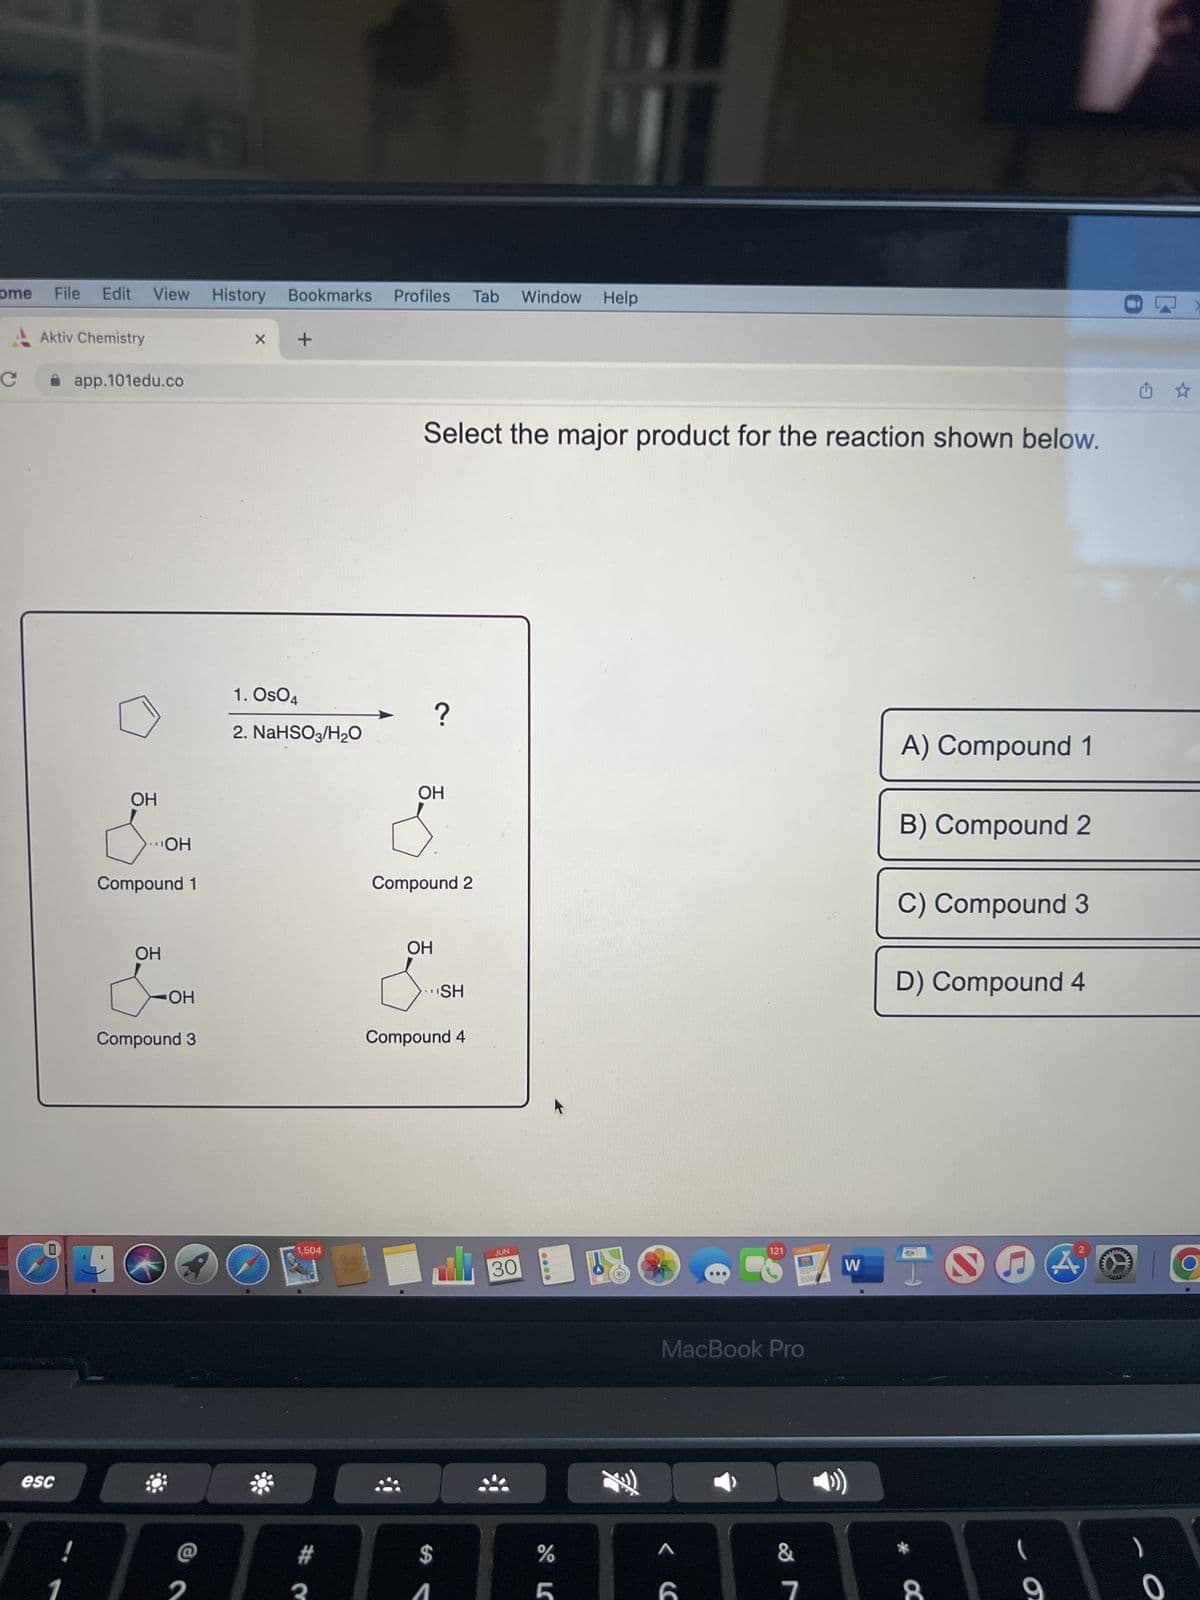 ome
C
L
esc
File Edit View History Bookmarks Profiles Tab
Aktiv Chemistry
app.101edu.co
OH
Compound 1
19
OH
OH
-OH
Compound 3
X +
1. Os04
2. NaHSO3/H₂O
1,504
Select the major product for the reaction shown below.
?
OH
Compound 2
OH
SH
Compound 4
Window Help
JUN
30
0000
do L
%
MacBook Pro
<C
121
A
&
7
W
A) Compound 1
B) Compound 2
C) Compound 3
D) Compound 4
* C
NA
O
2
MA
O
☆